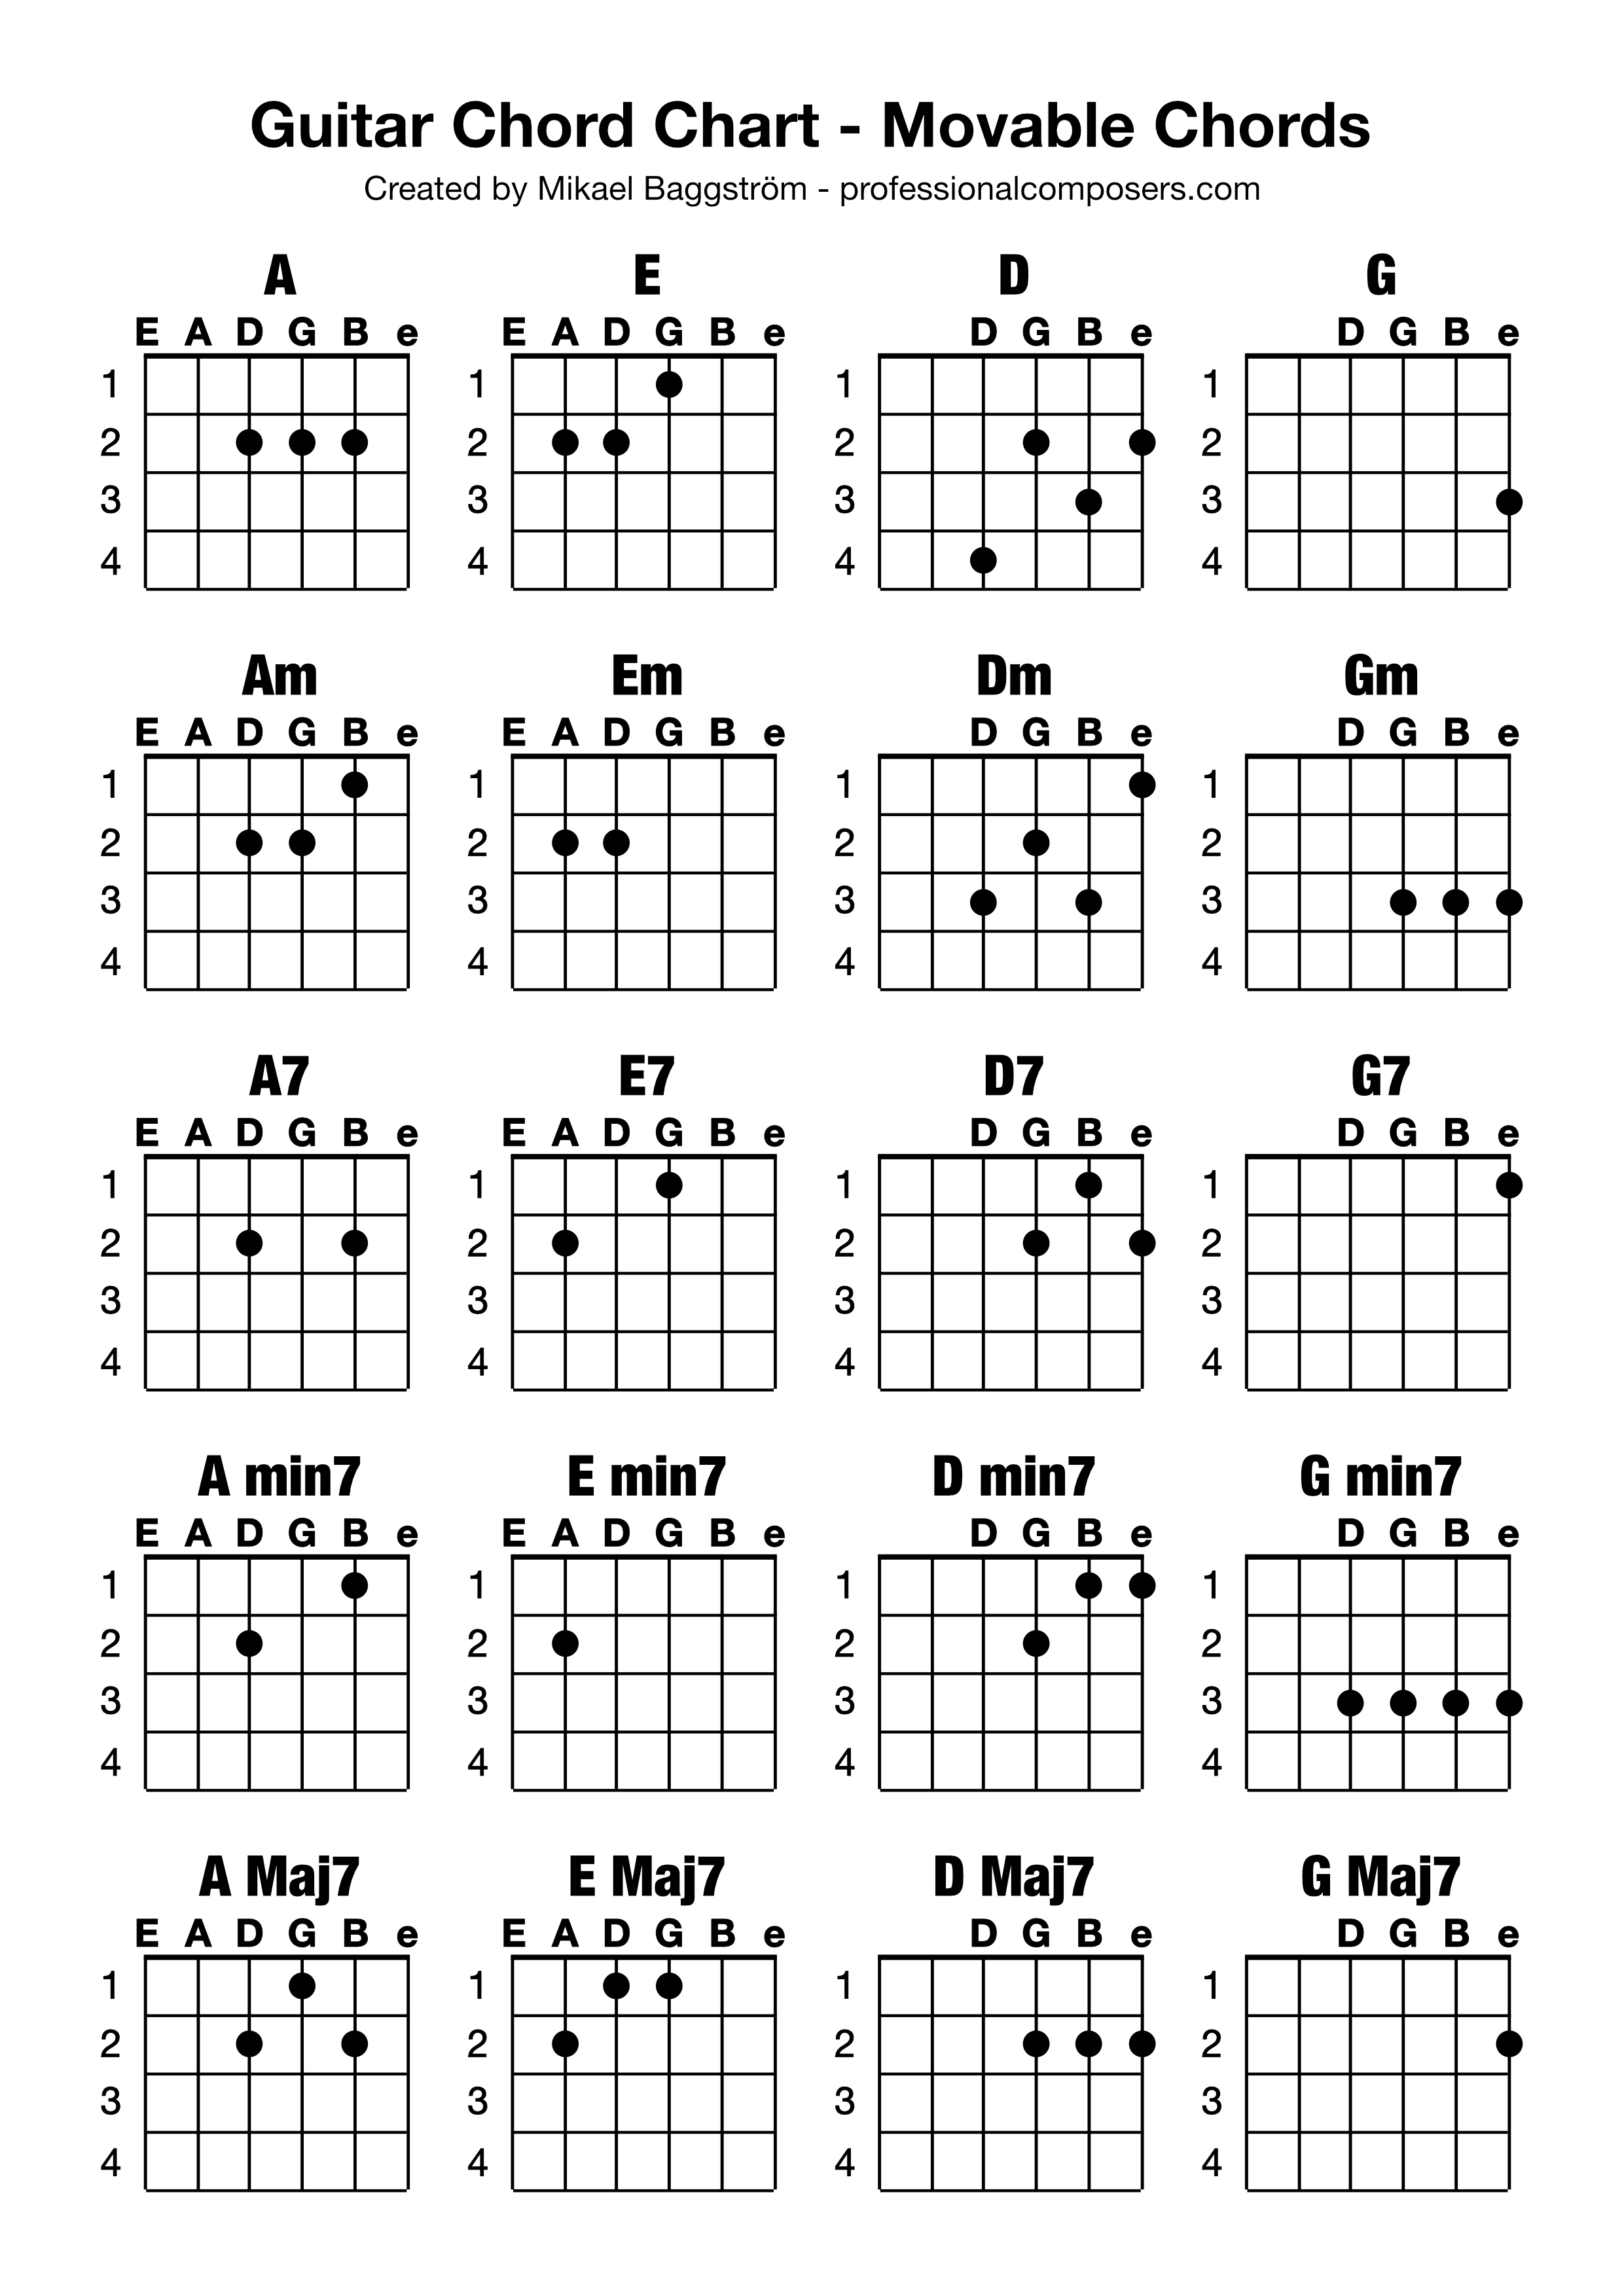 boost-your-guitar-playing-free-movable-chord-chart-printable